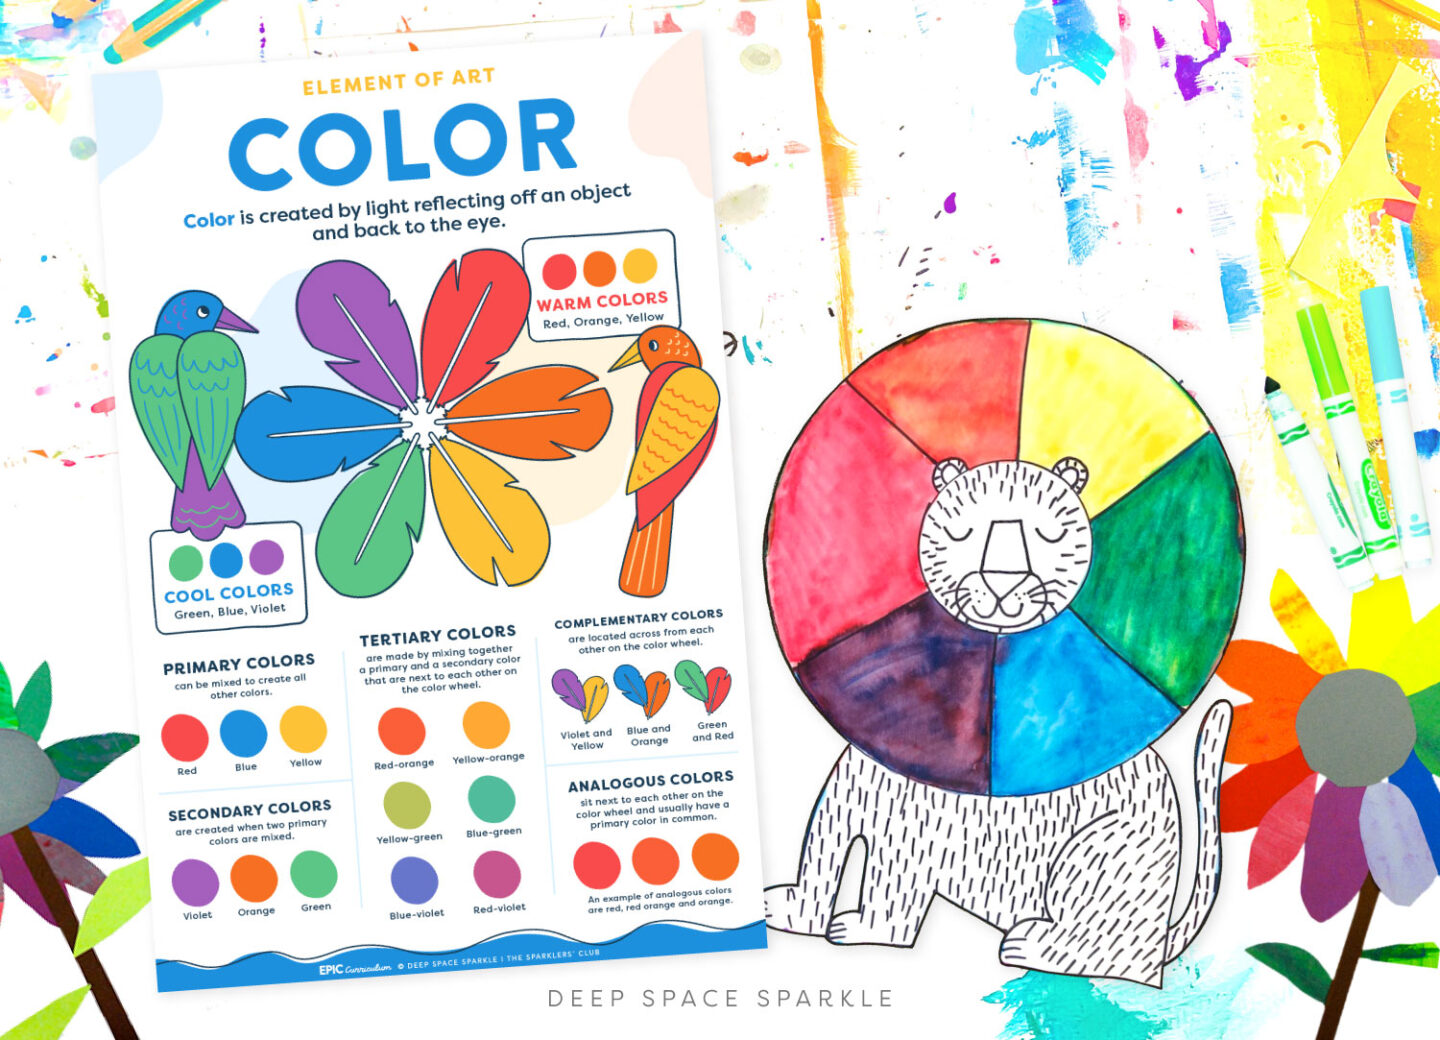 Basic colors theory for kids concept. Colour palette of primary, secondary  and tertiary color, warm and cool scheme with kids hand writing.  Complementary, Poster, Chart, Learning, Painting, Arts. Stock Photo